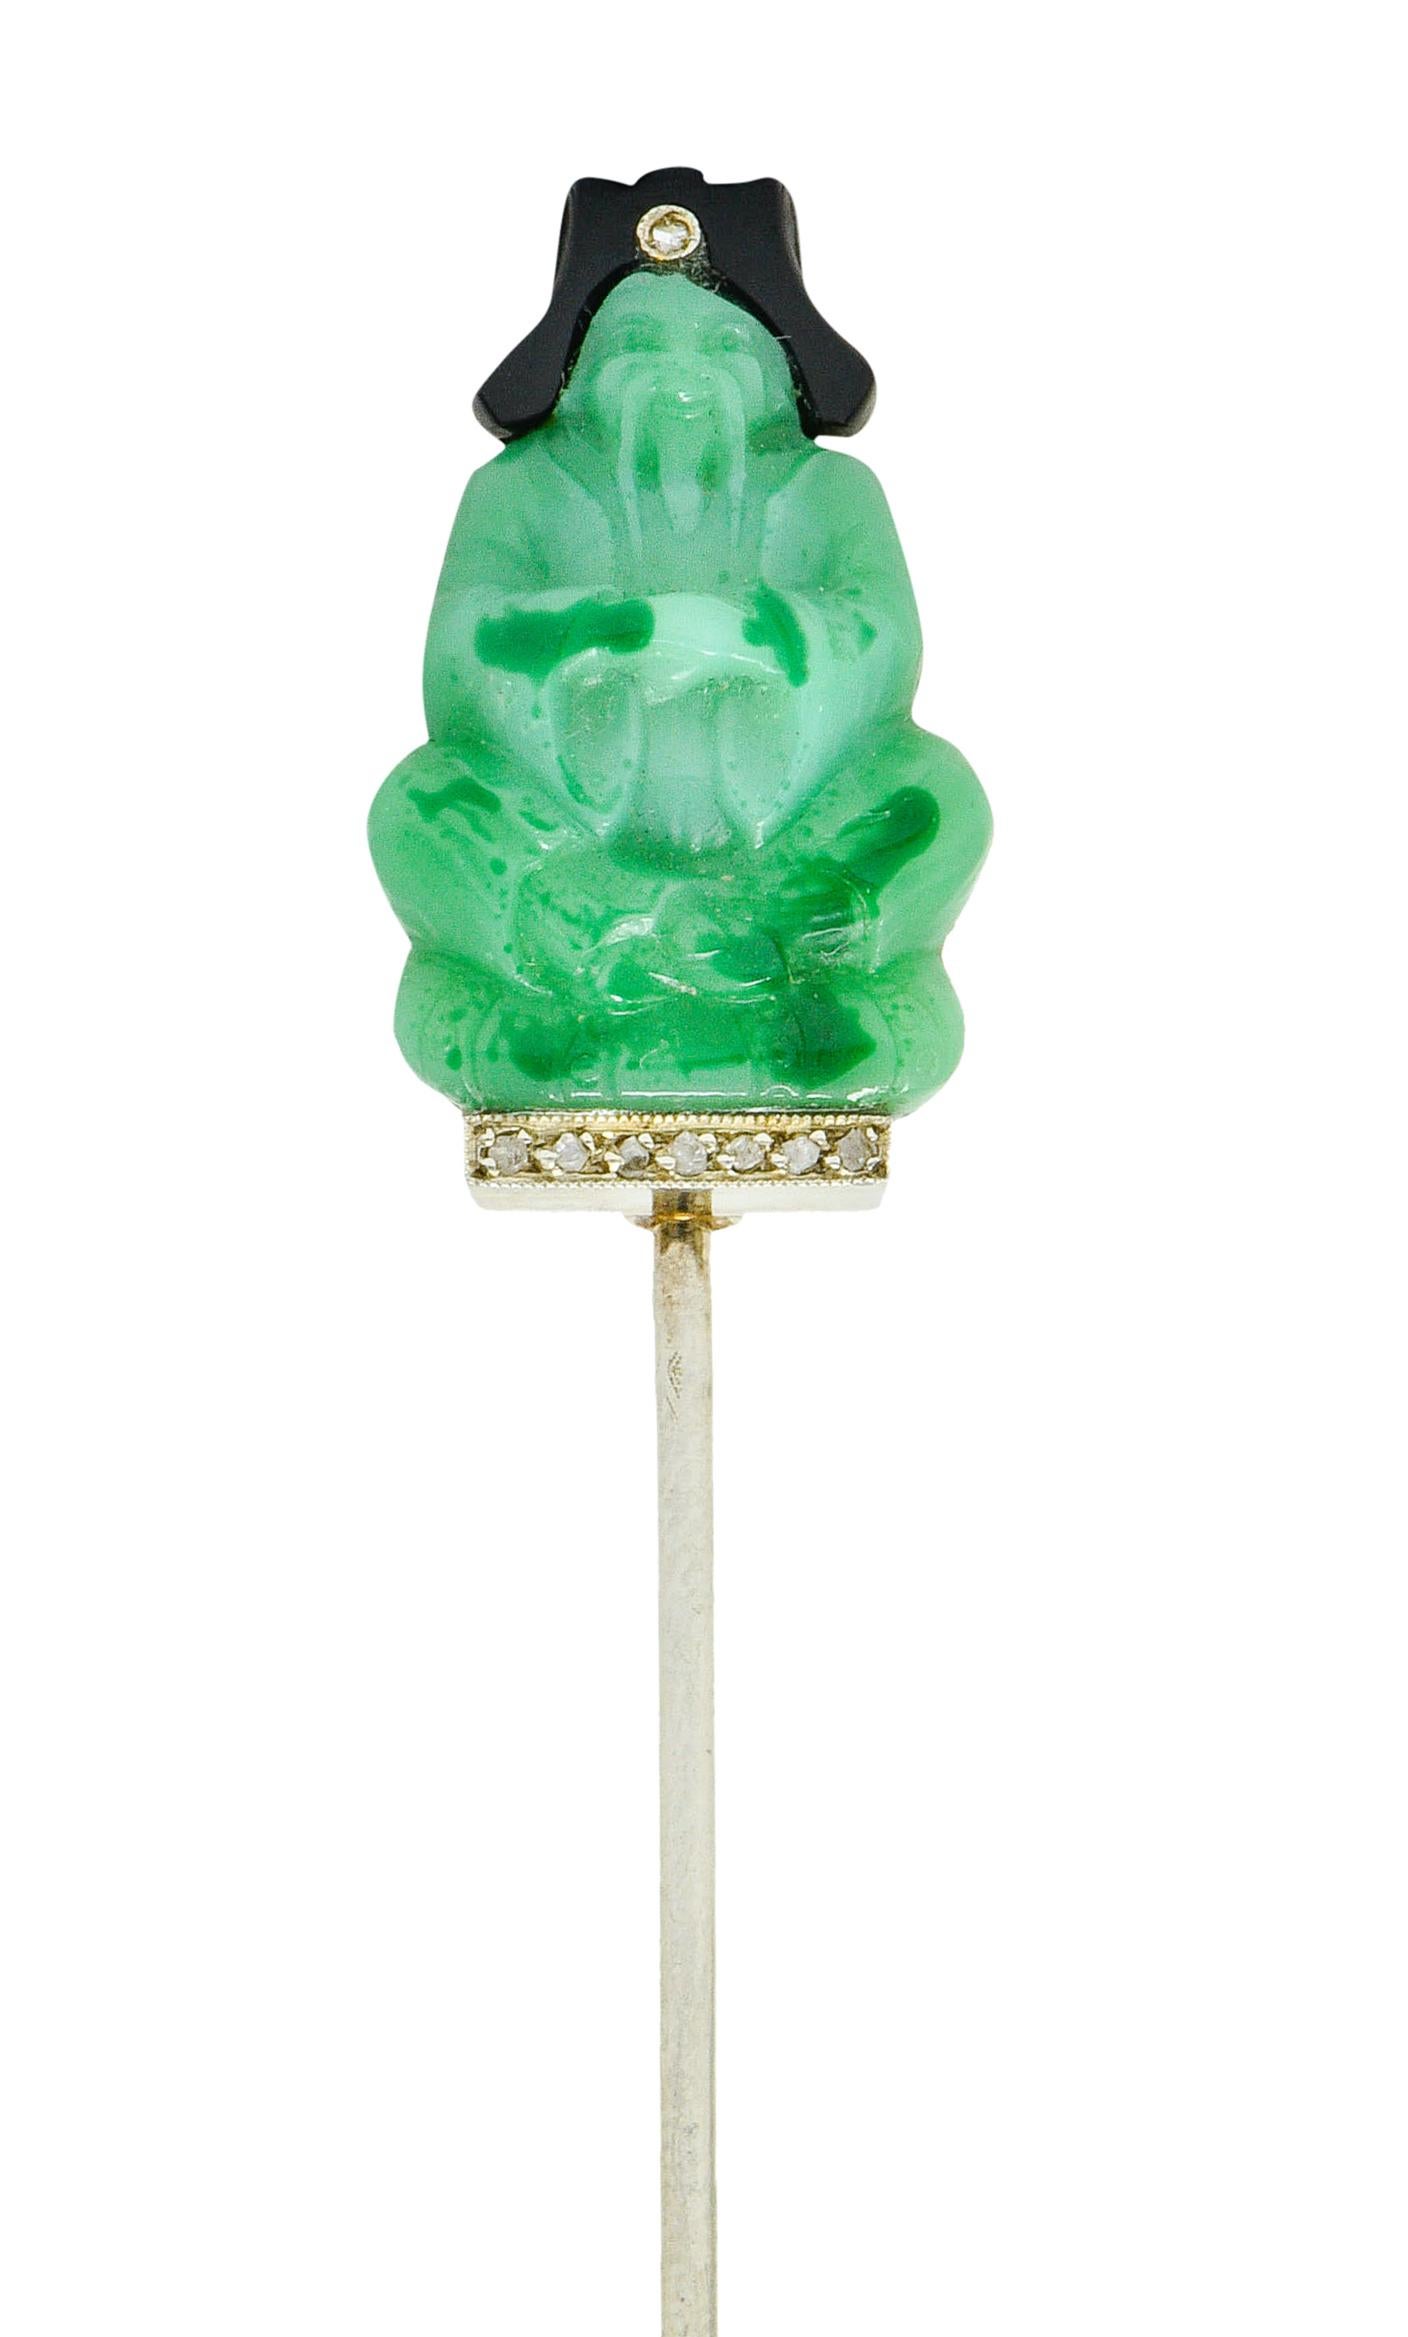 Jabot stickpin features deeply carved jade that depicts a seated and mustached emperor

Jade is semi-opaque and a light pastel green color with unique dark green areas of mottling

Topped by an onyx headdress, opaque and lustrous black

With